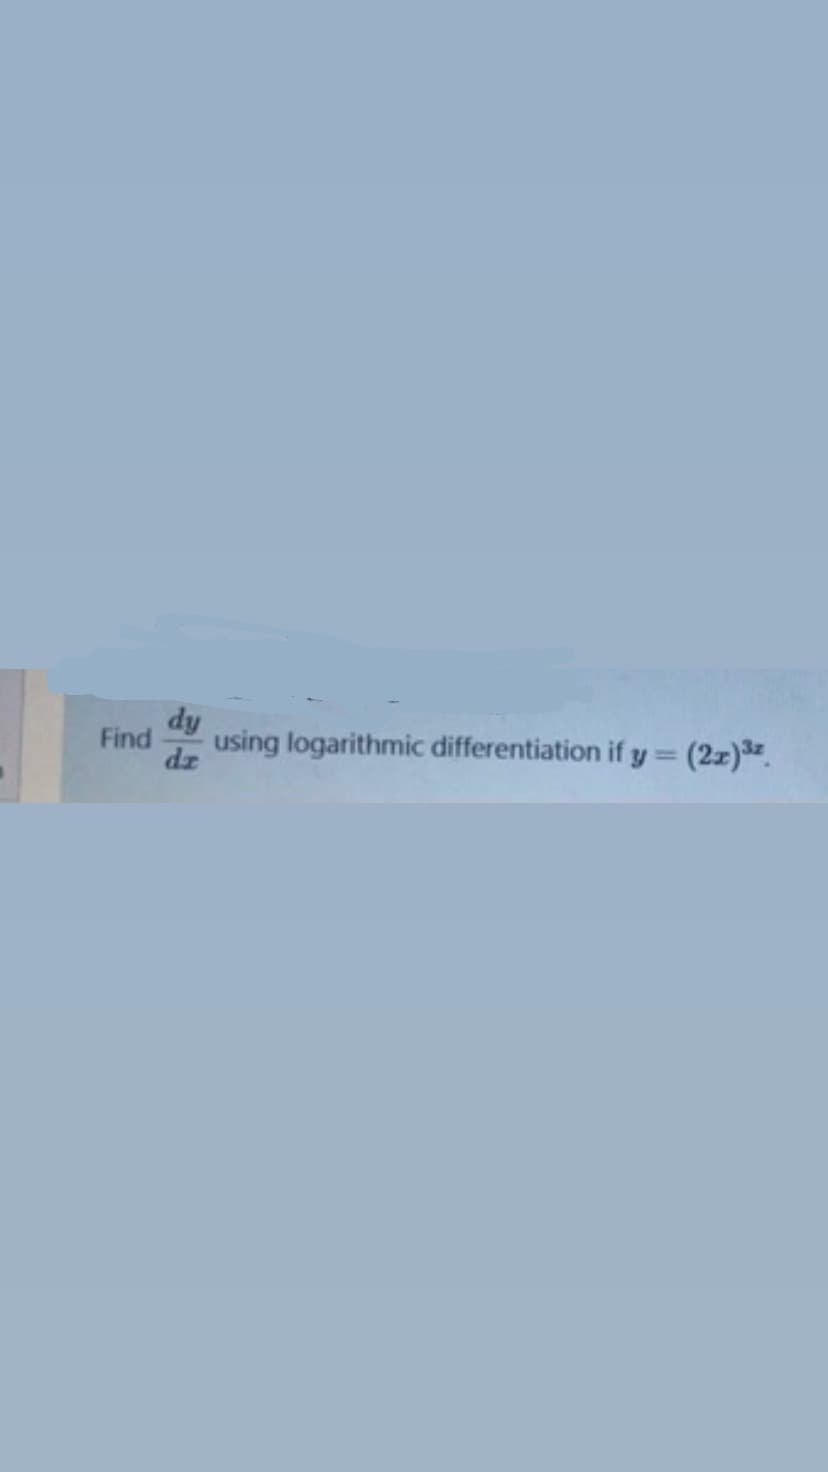 dy
Find
using logarithmic differentiation if y = (2z).
dz
%3D
